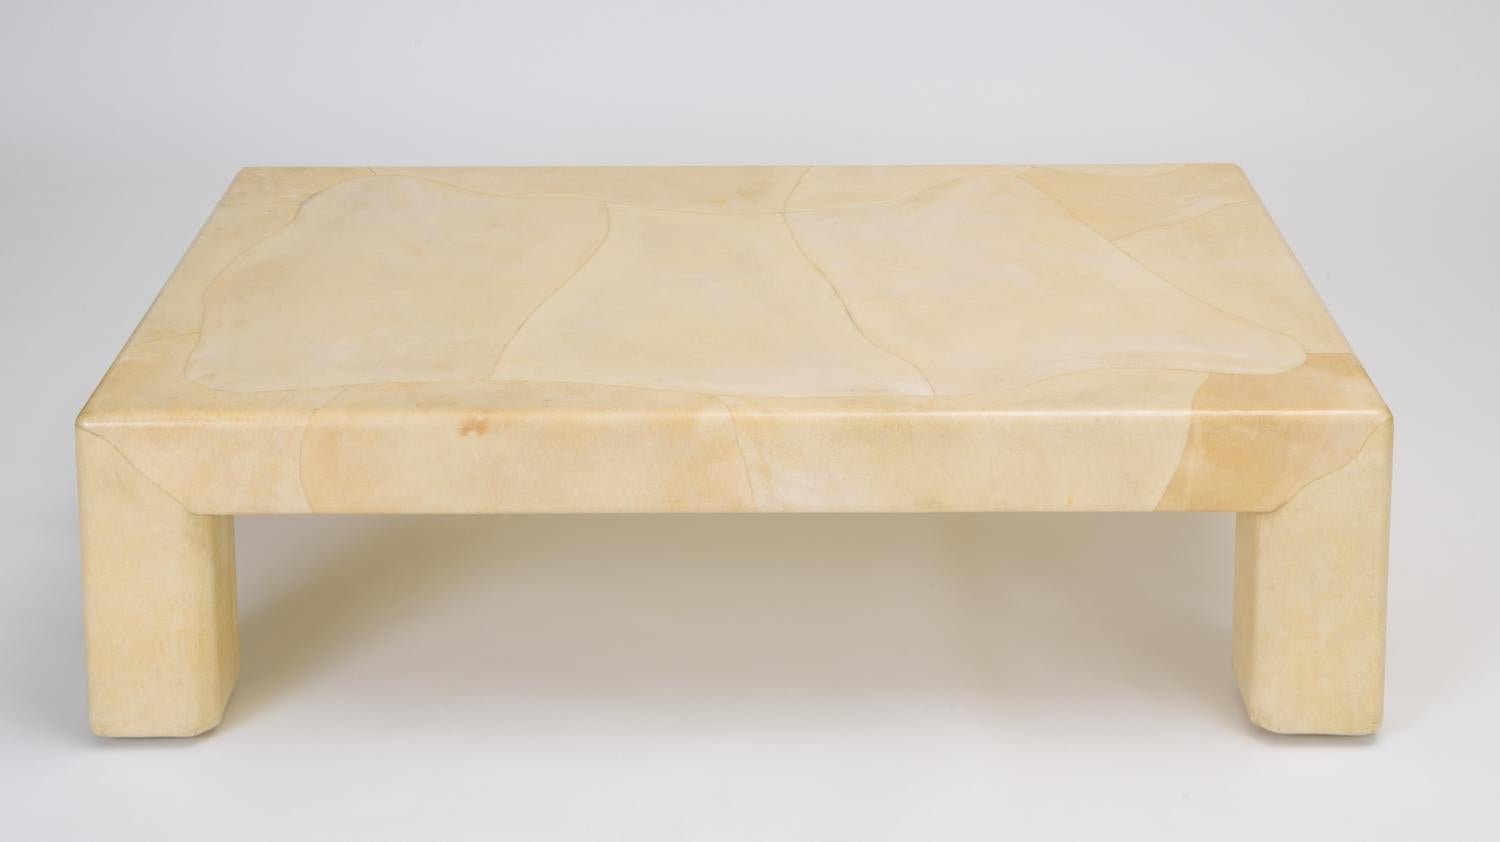 Chunky, oversize legs and shapely curves define this Karl Springer-Esque coffee table. Goatskin parchment is stretched over the wooden frame and finished with a high gloss lacquer. The edges of the legs and tabletop are softly rounded and small